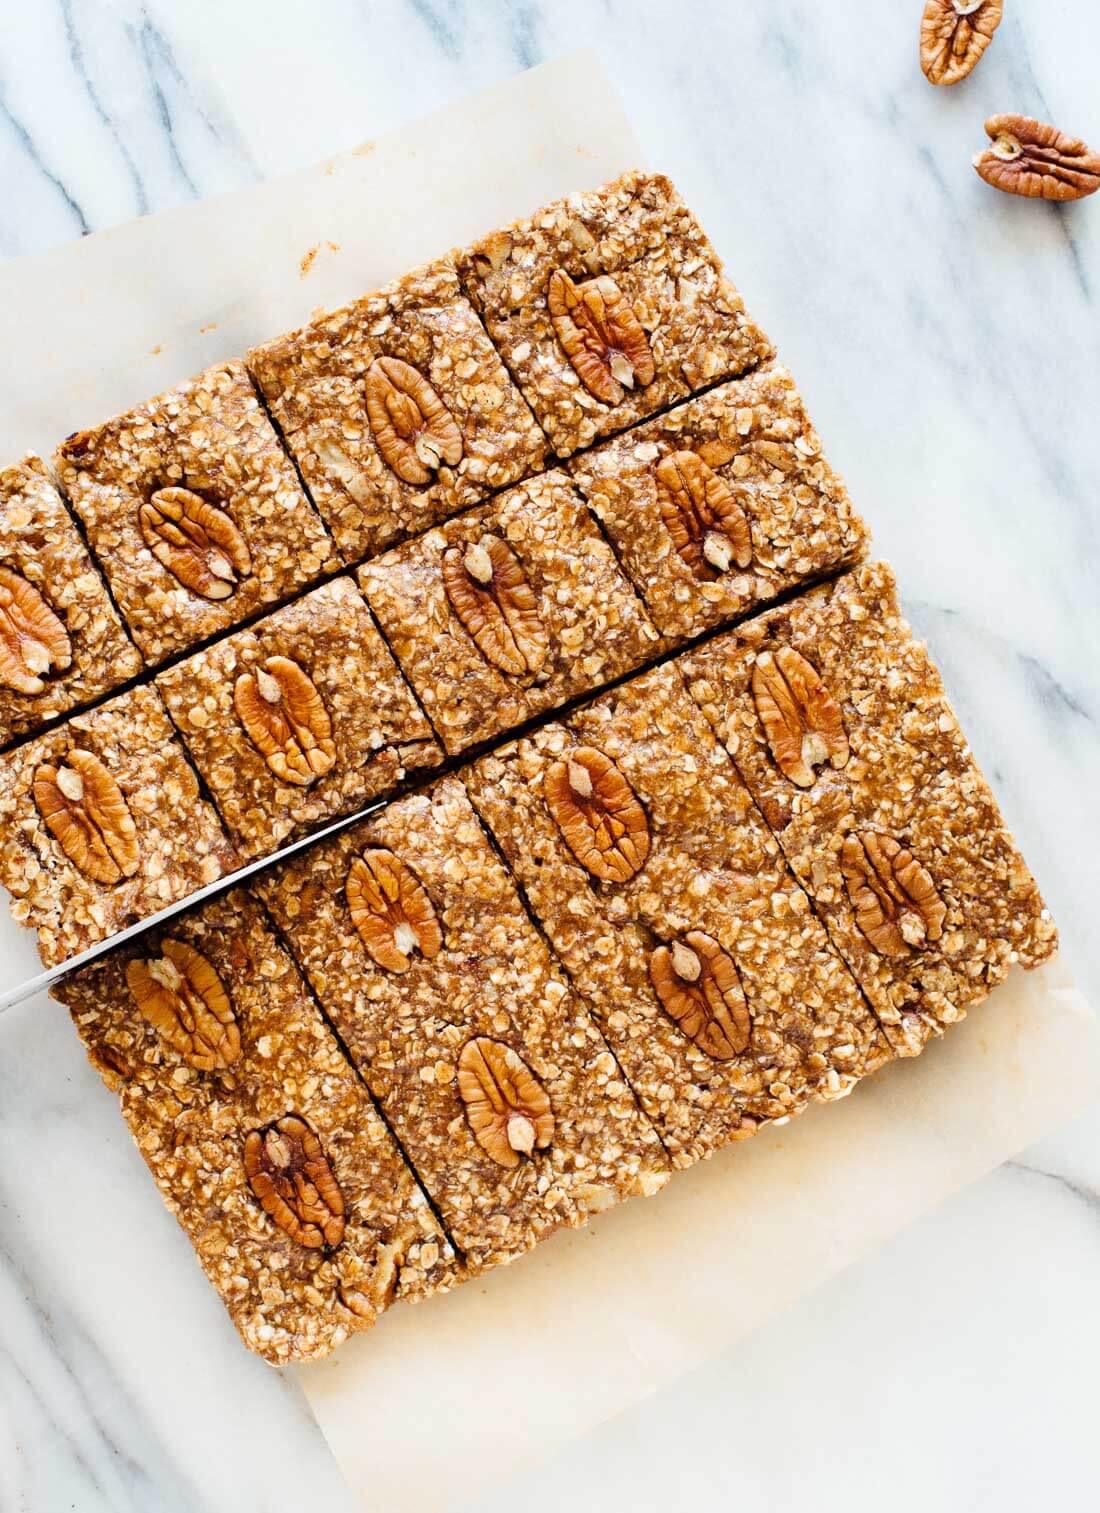 These no-bake pecan granola bars taste one million time better than store-bought granola bars! They're gluten free and vegan, too. Get the recipe at cookieandkate.com